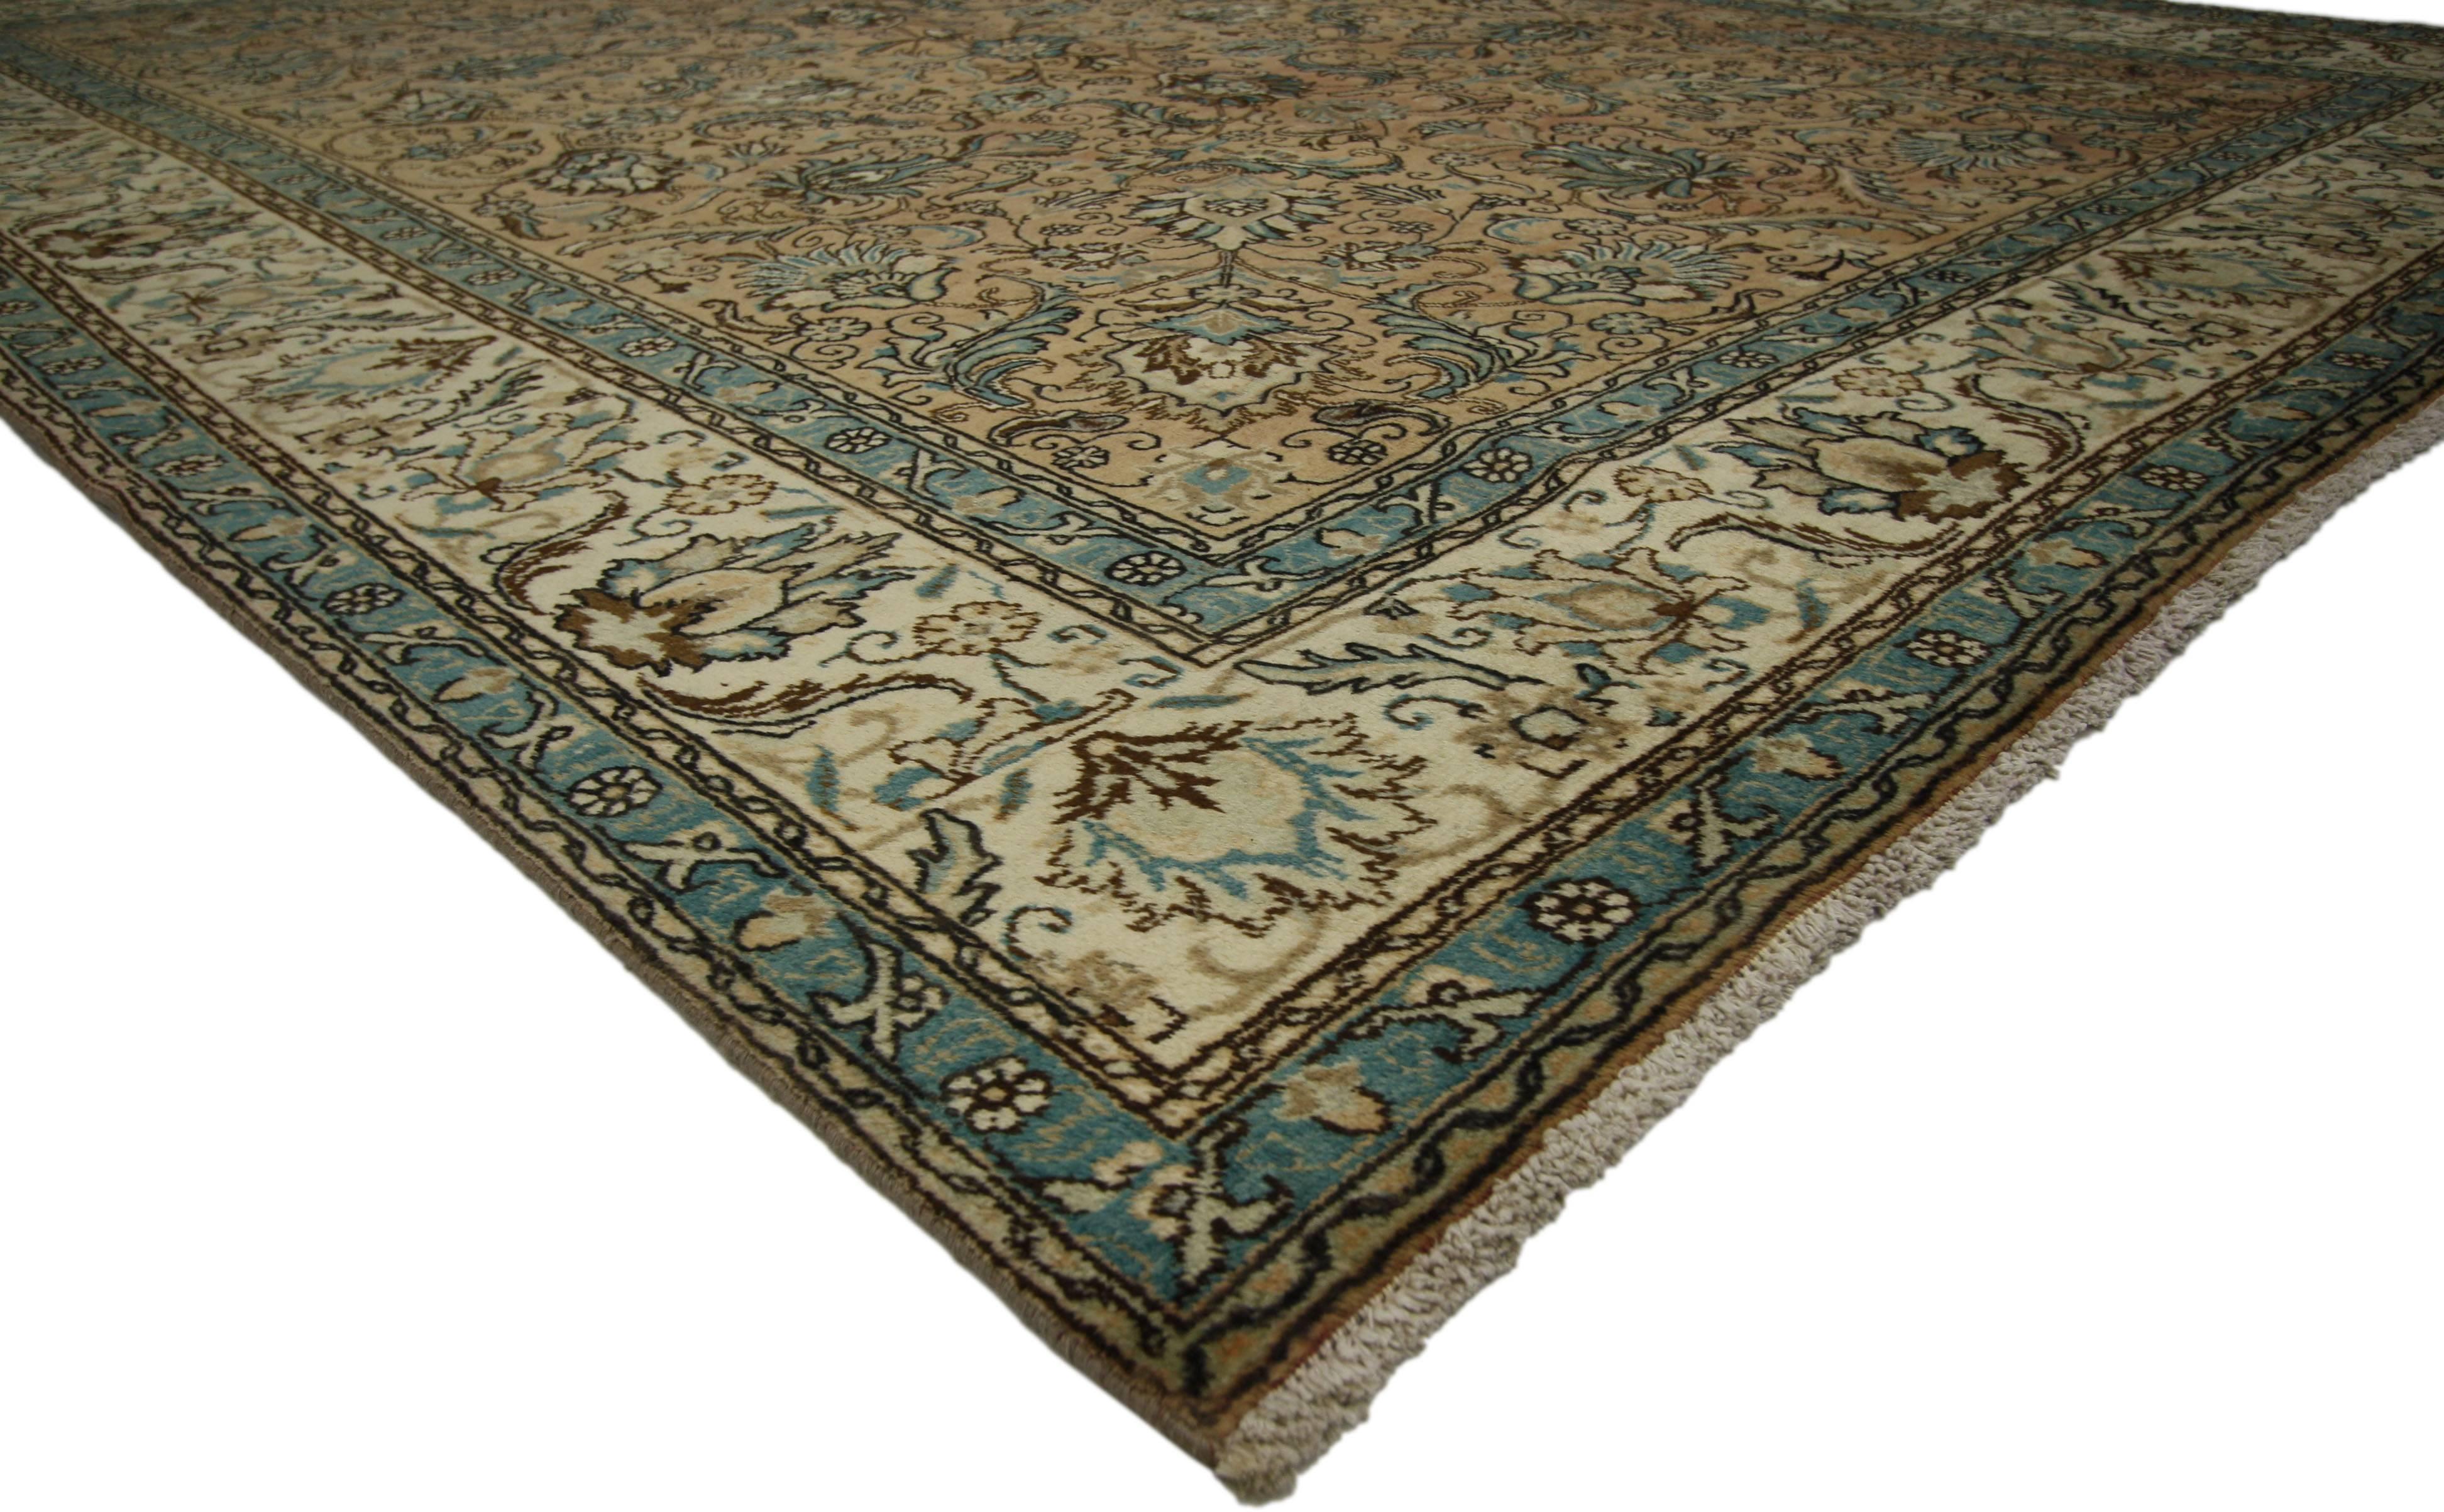 76289 Vintage Persian Tabriz Rug with Rustic Georgian Style 09'05 X 12'04. With a traditional feel and Classic floral pattern, this hand-knotted wool vintage Persian Tabriz rug beautifully embodies a rustic Georgian style. It features an all-over